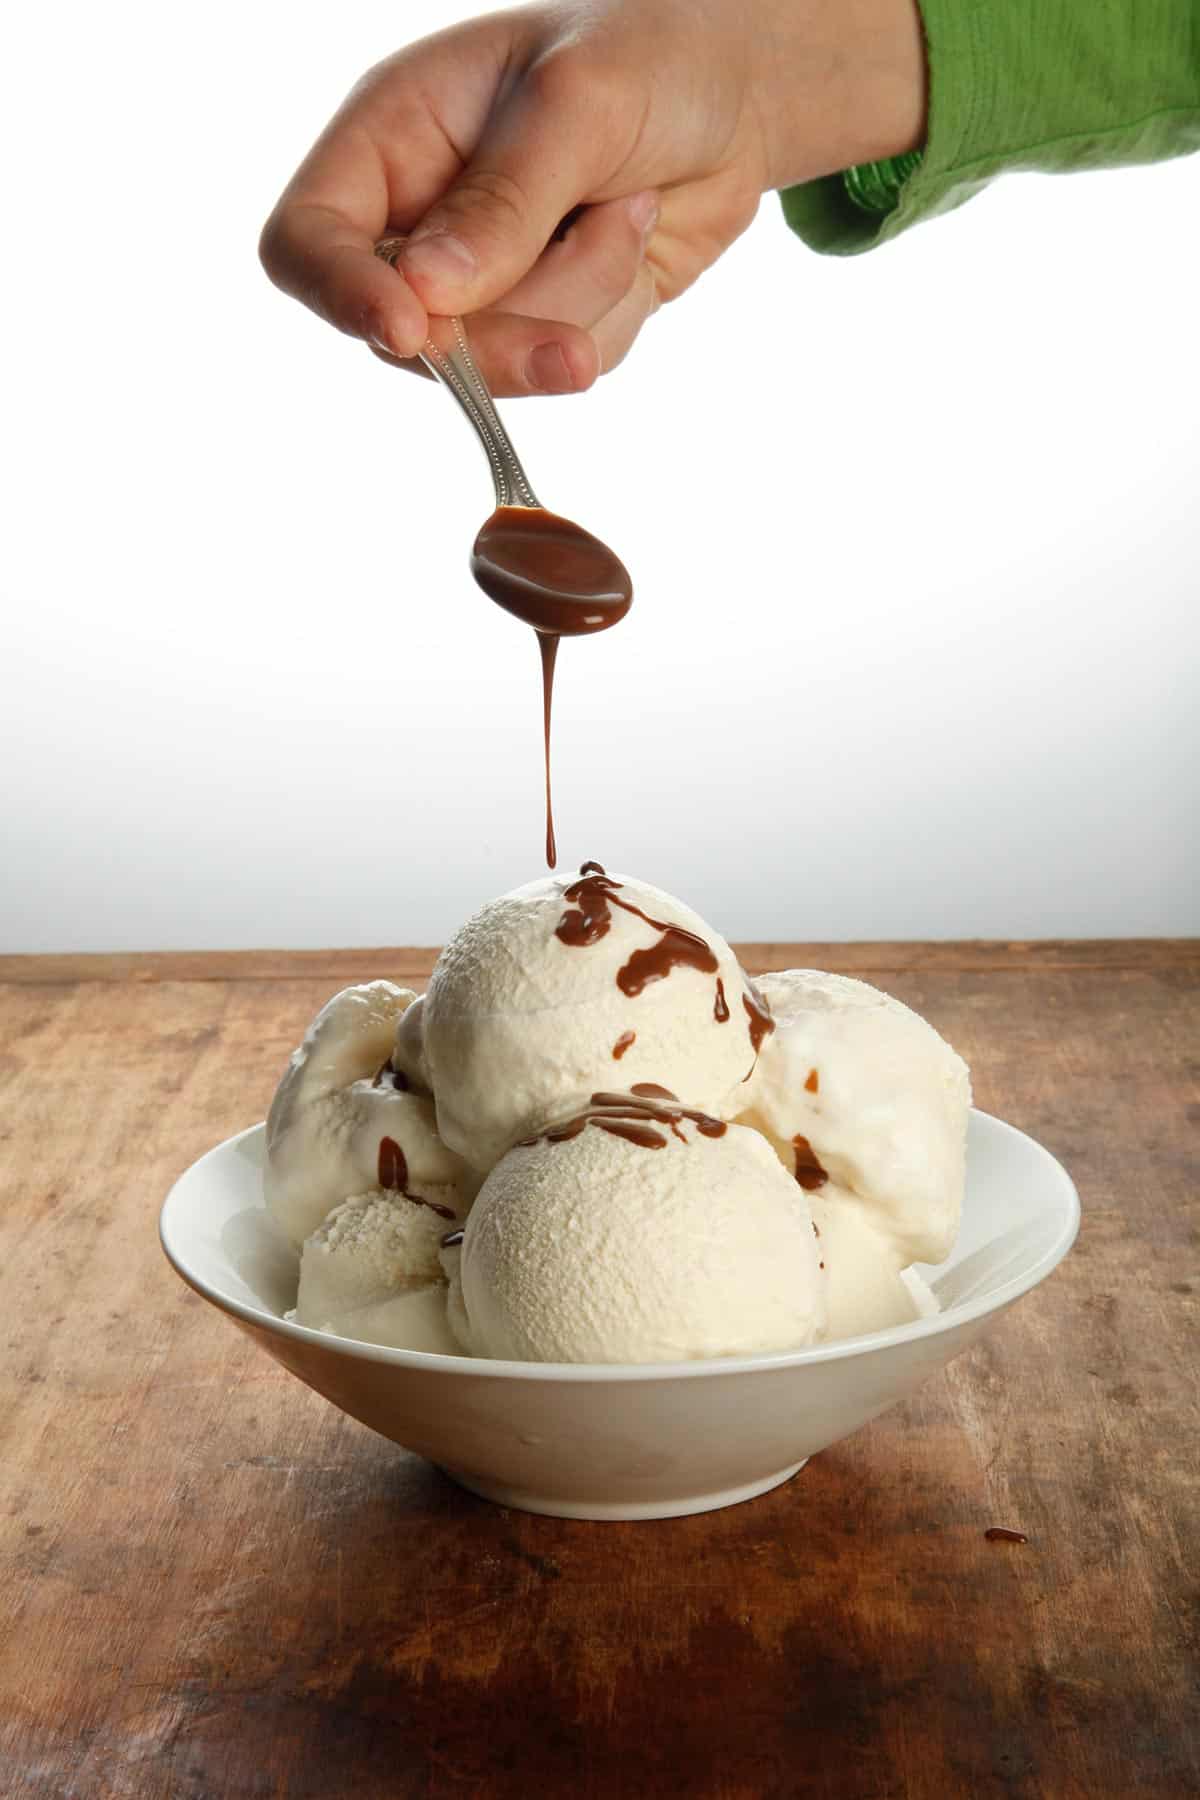 Pouring hot fudge sauce over bowl of vanilla ice cream on wood table.